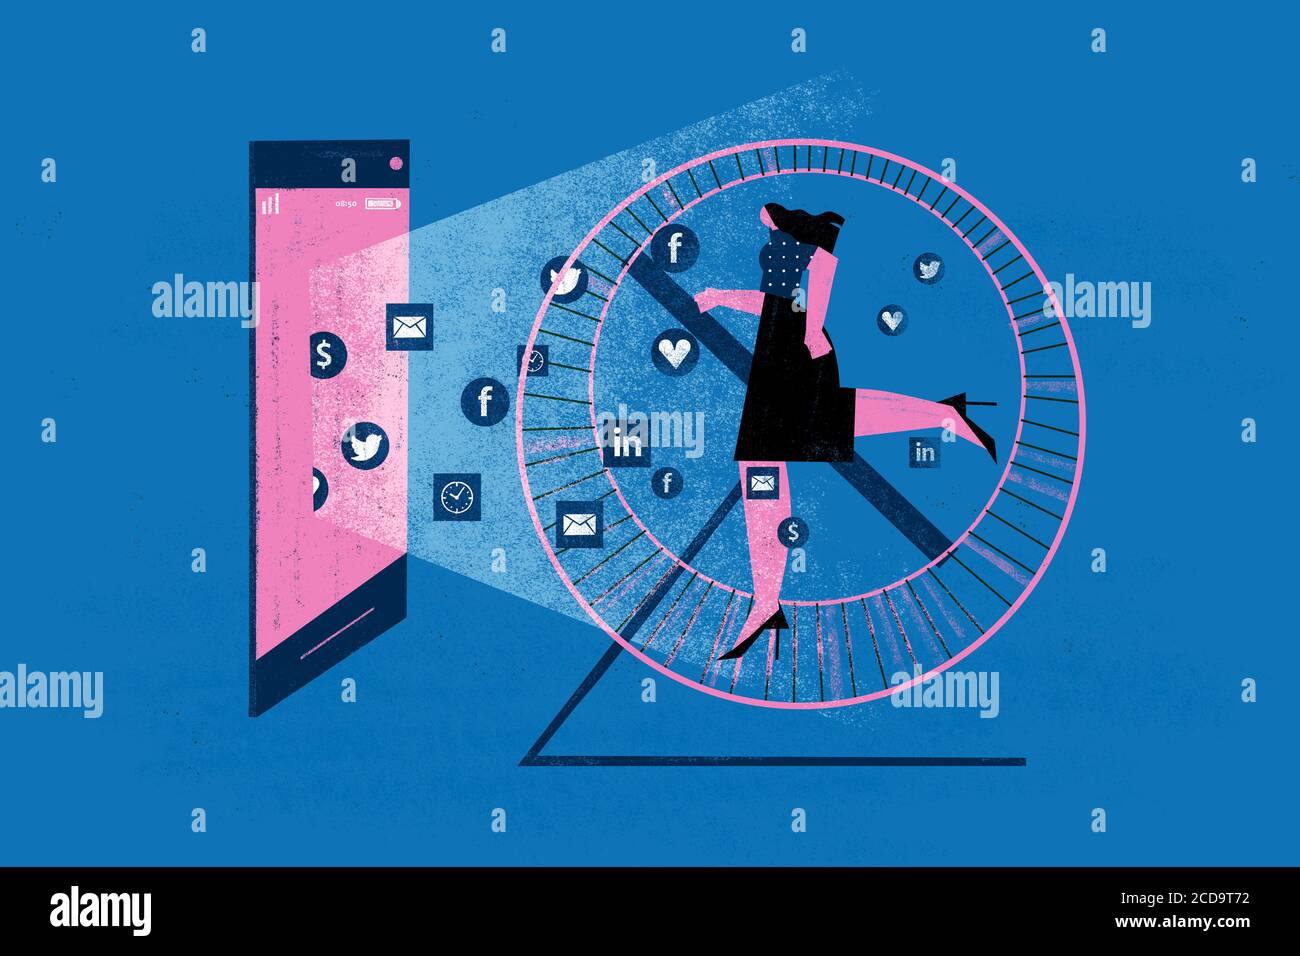 Hamster wheel of anxiety and social networking addiction due to insane use of new technologies and apps. Stock Photo